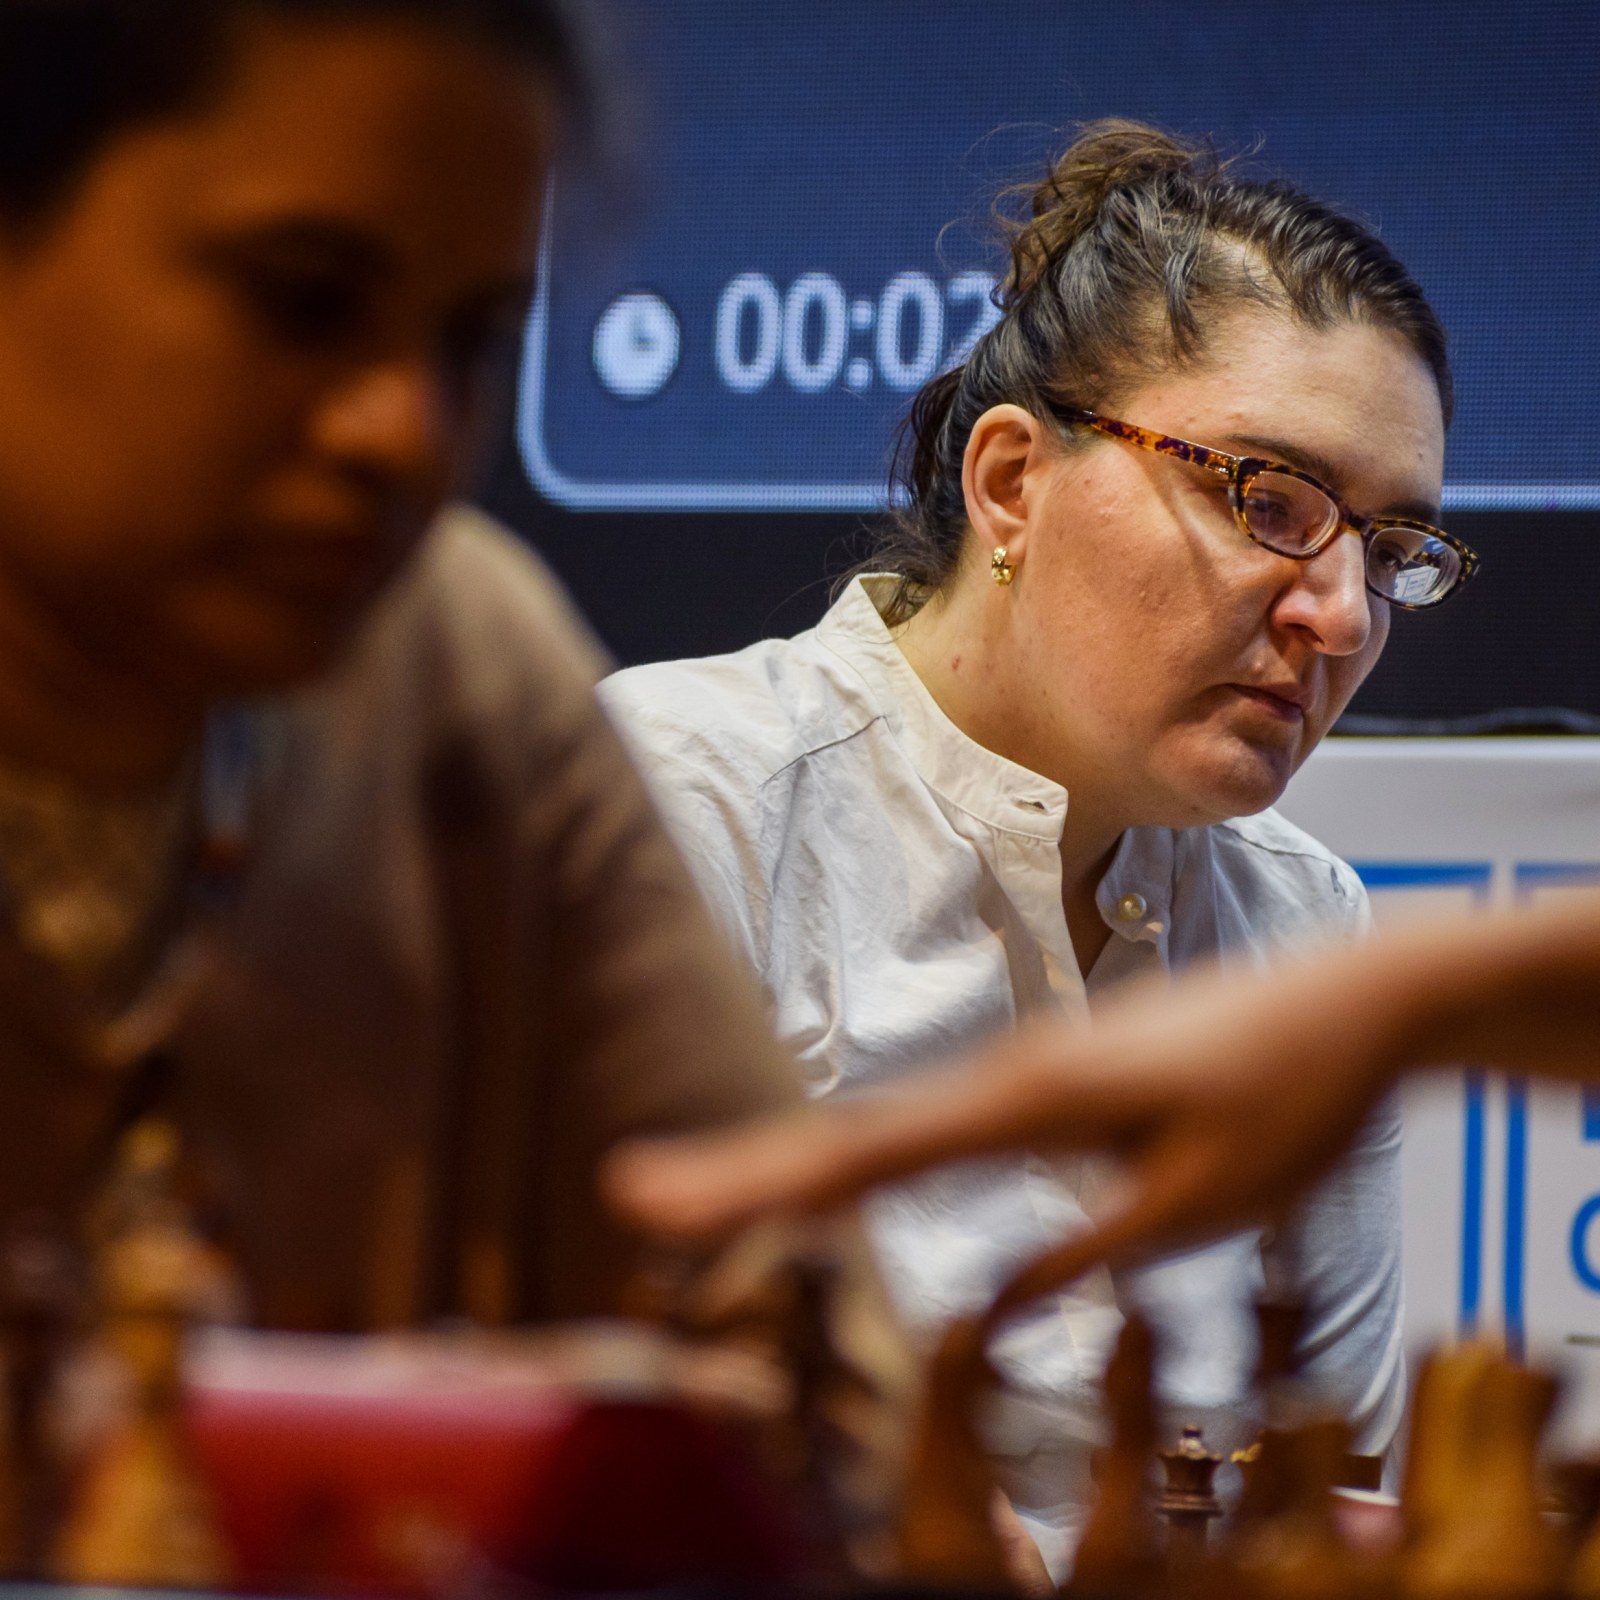 FIDE Candidates Tournament Officially Opened In Absence Of Participants 